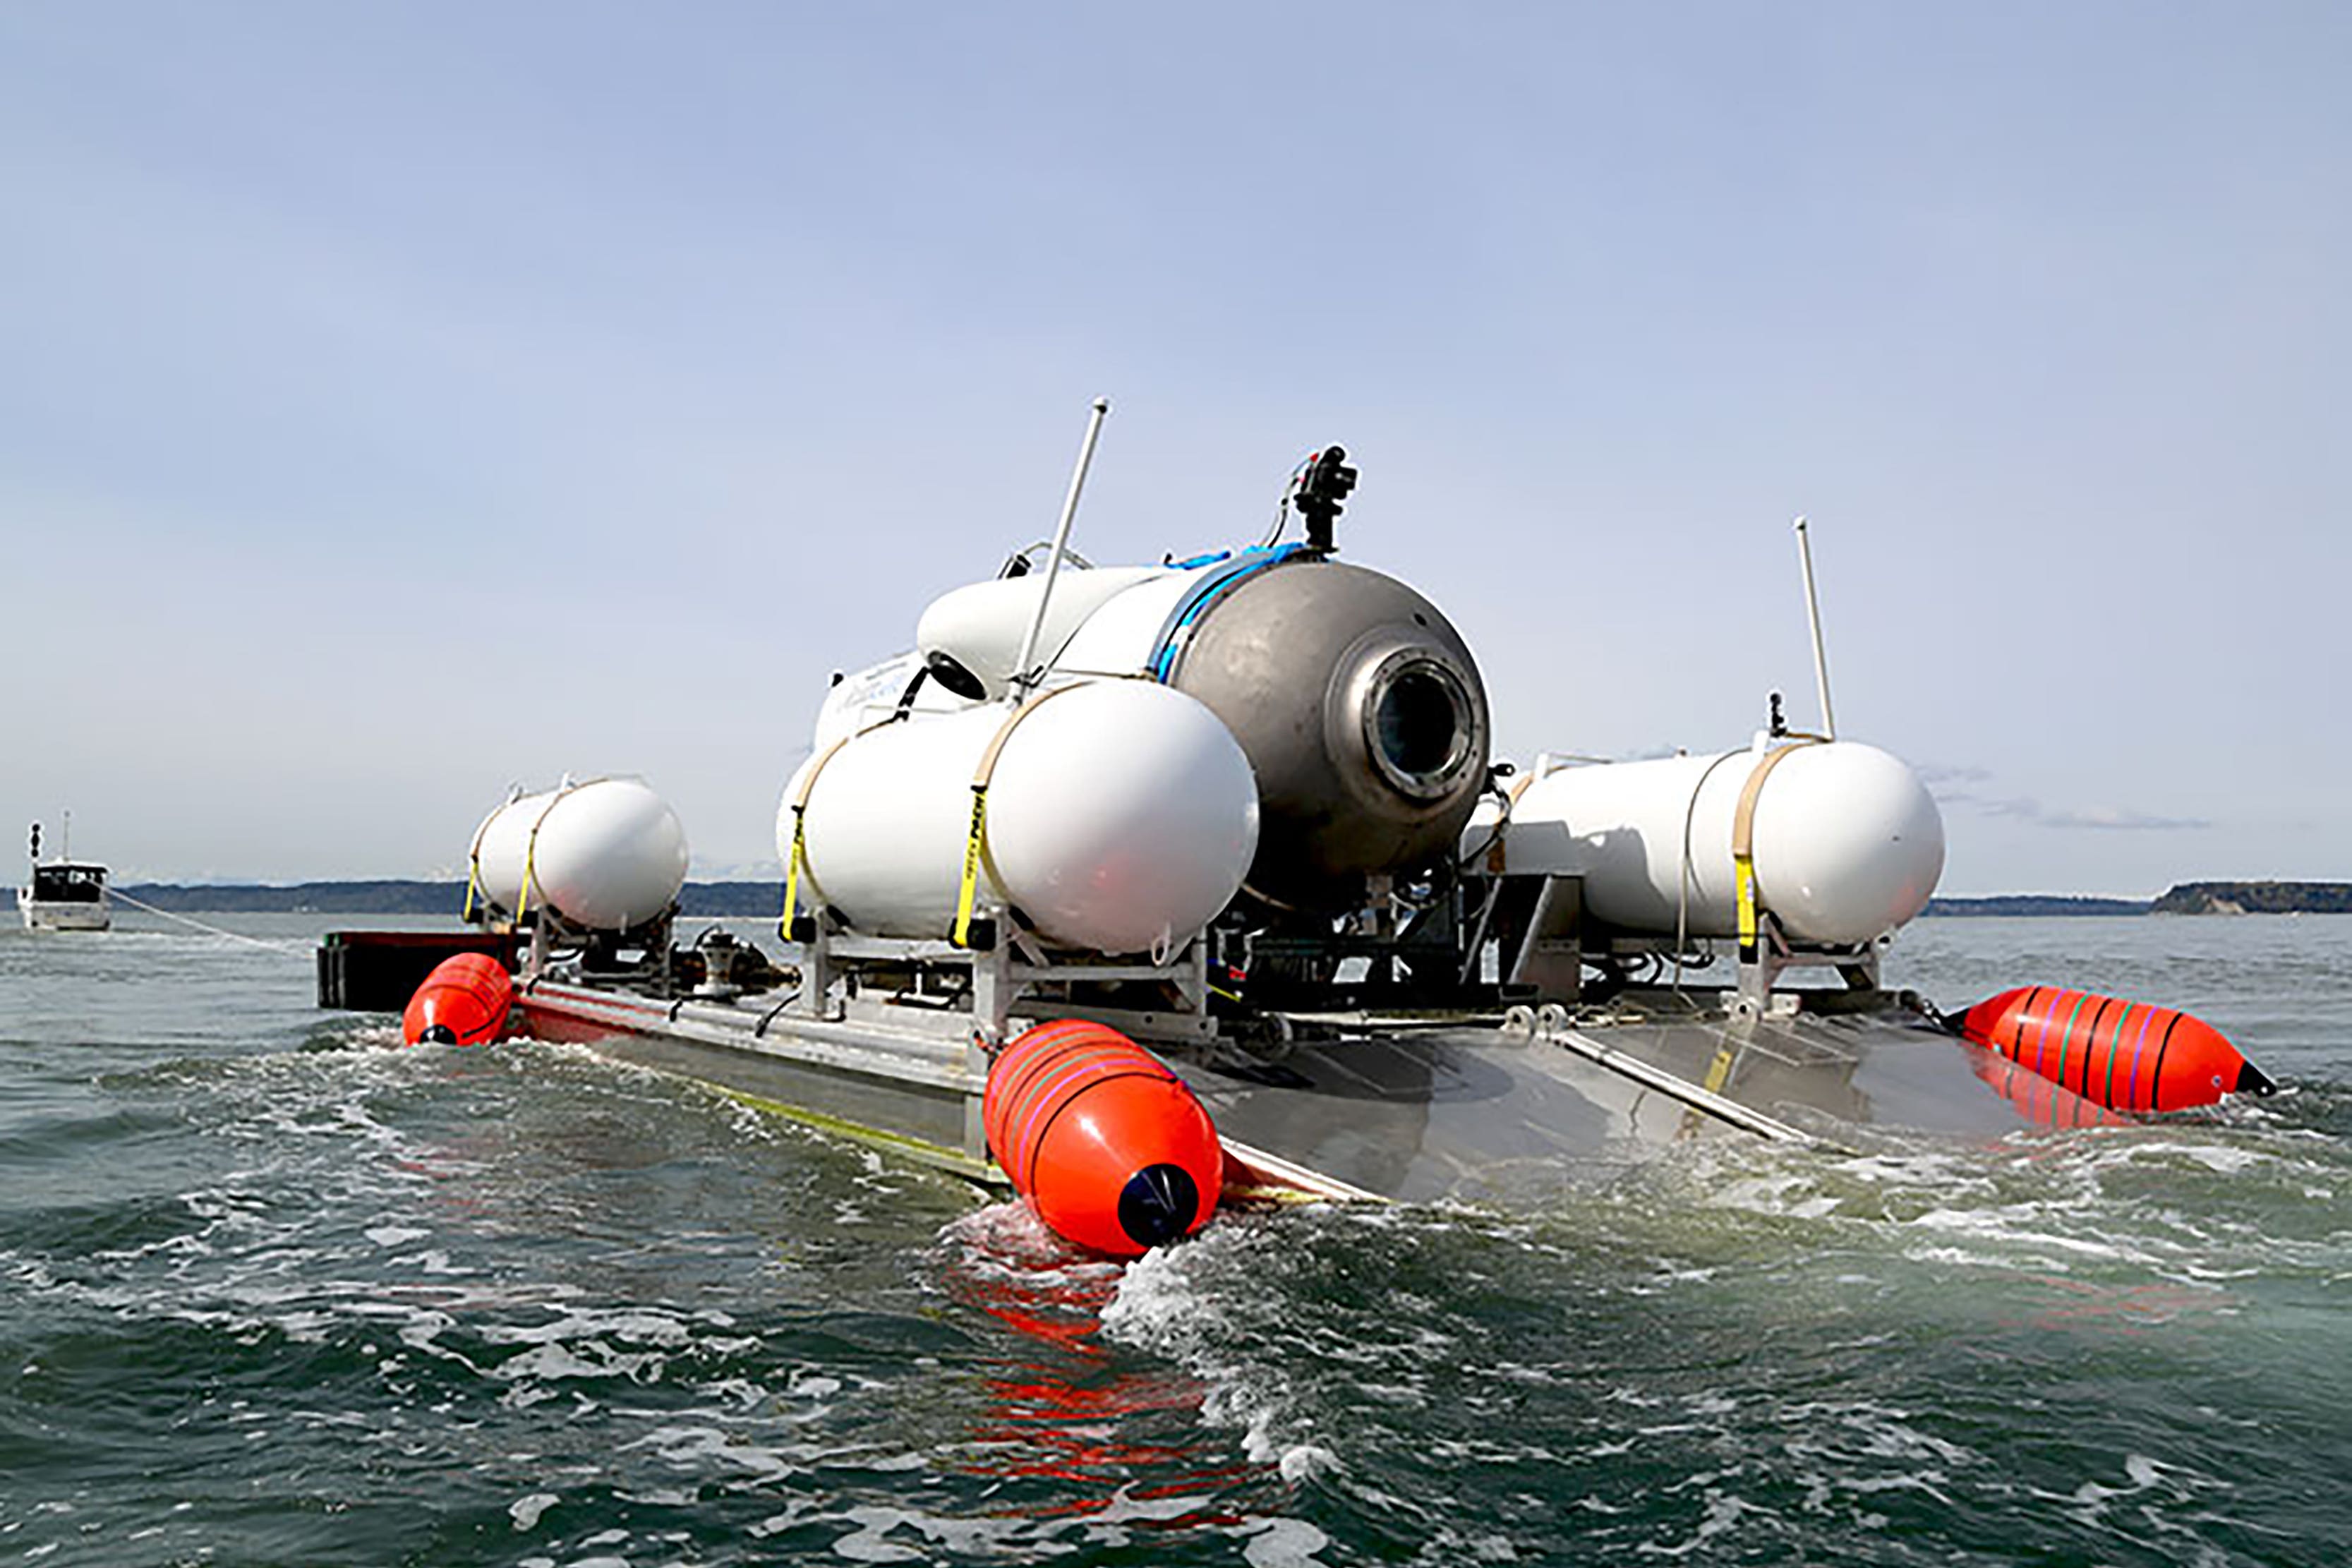 Submersible Titan is still missing and experts fear oxygen will run out on Thursday morning